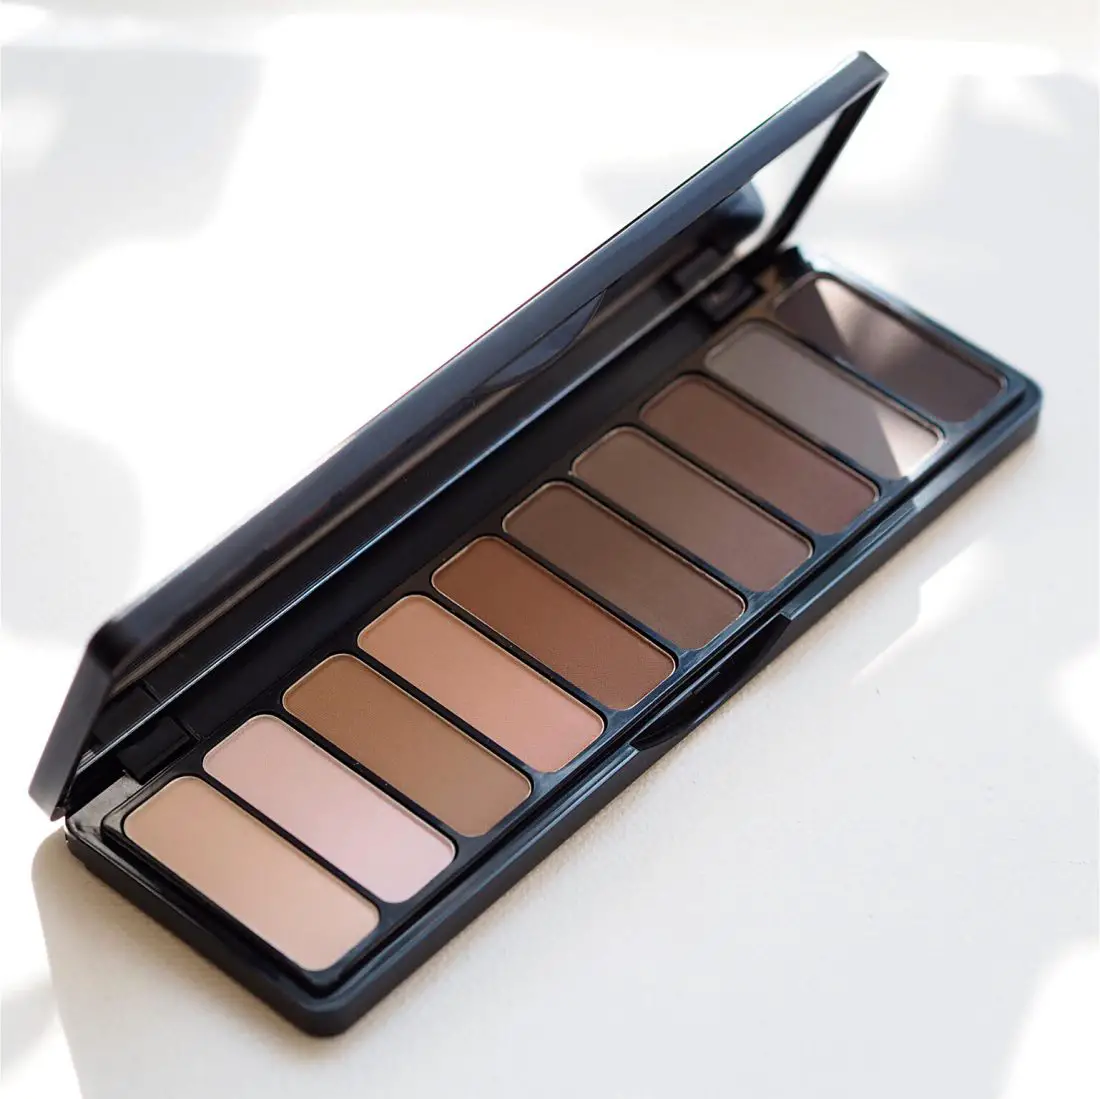 Save on e.l.f. Mad for Matte Eyeshadow Palette Nude Mood 